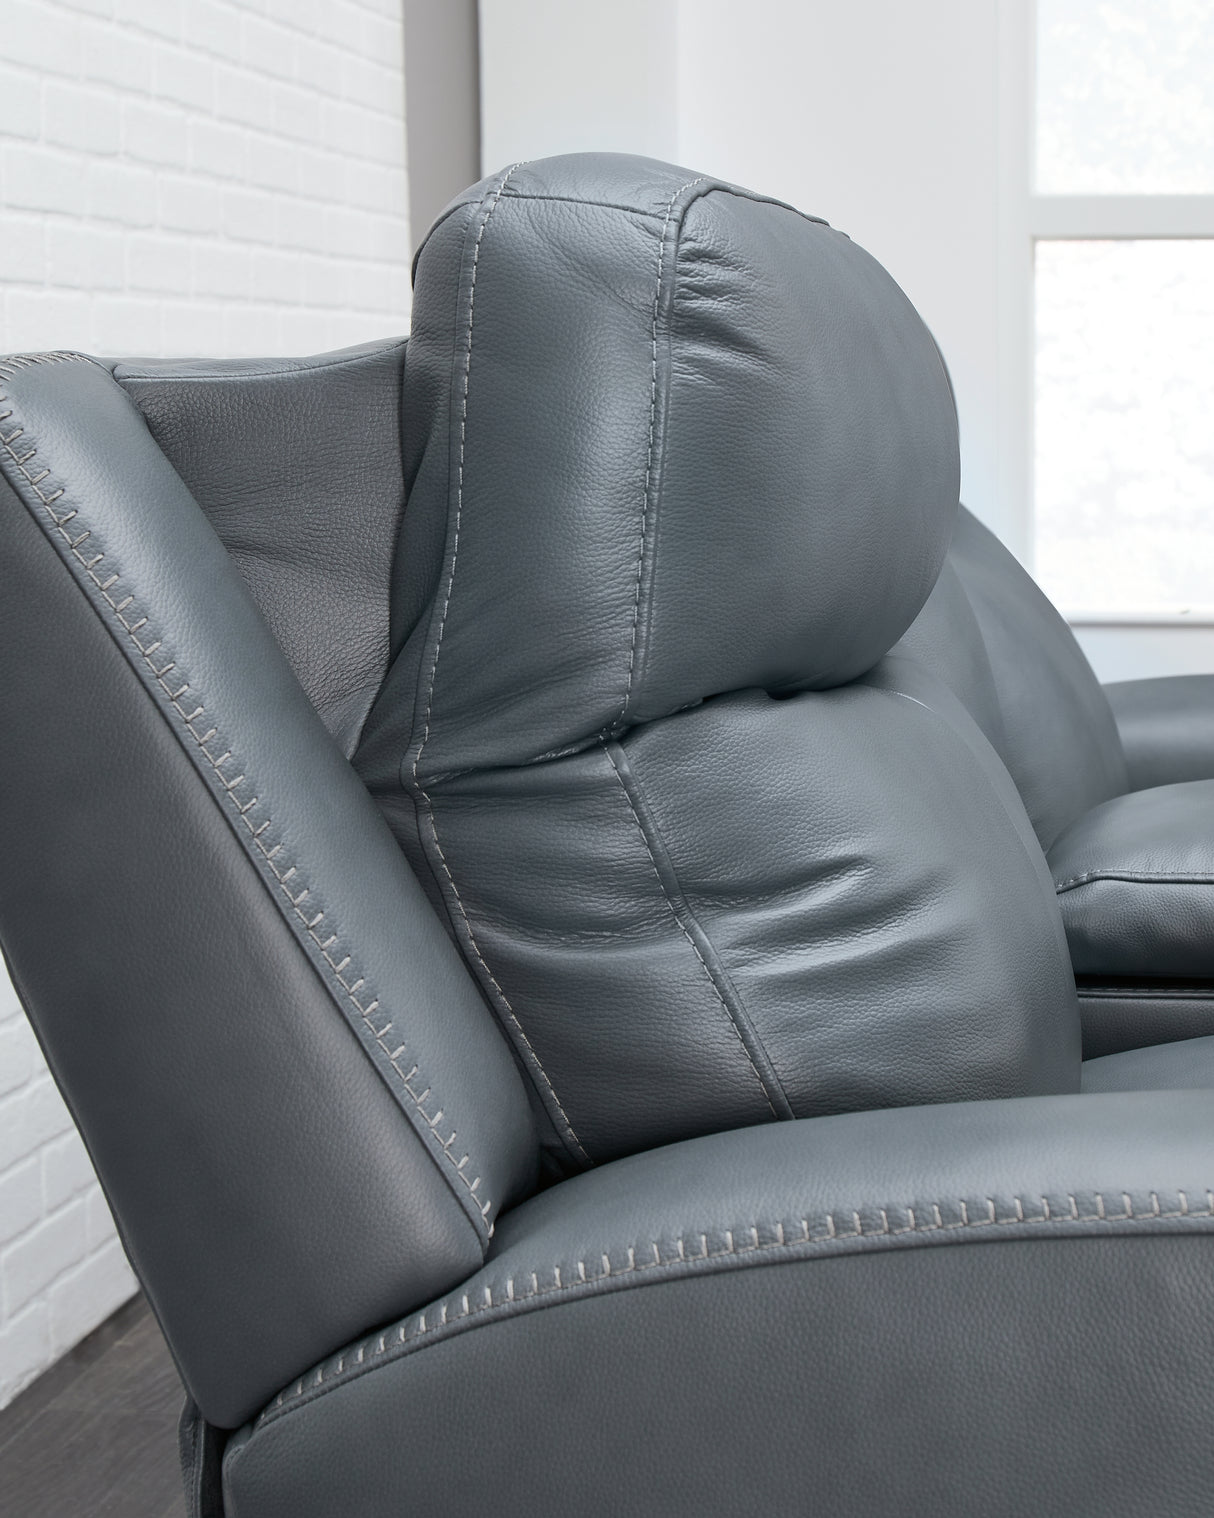 Mindanao Steel Leather Power Reclining Loveseat With Console